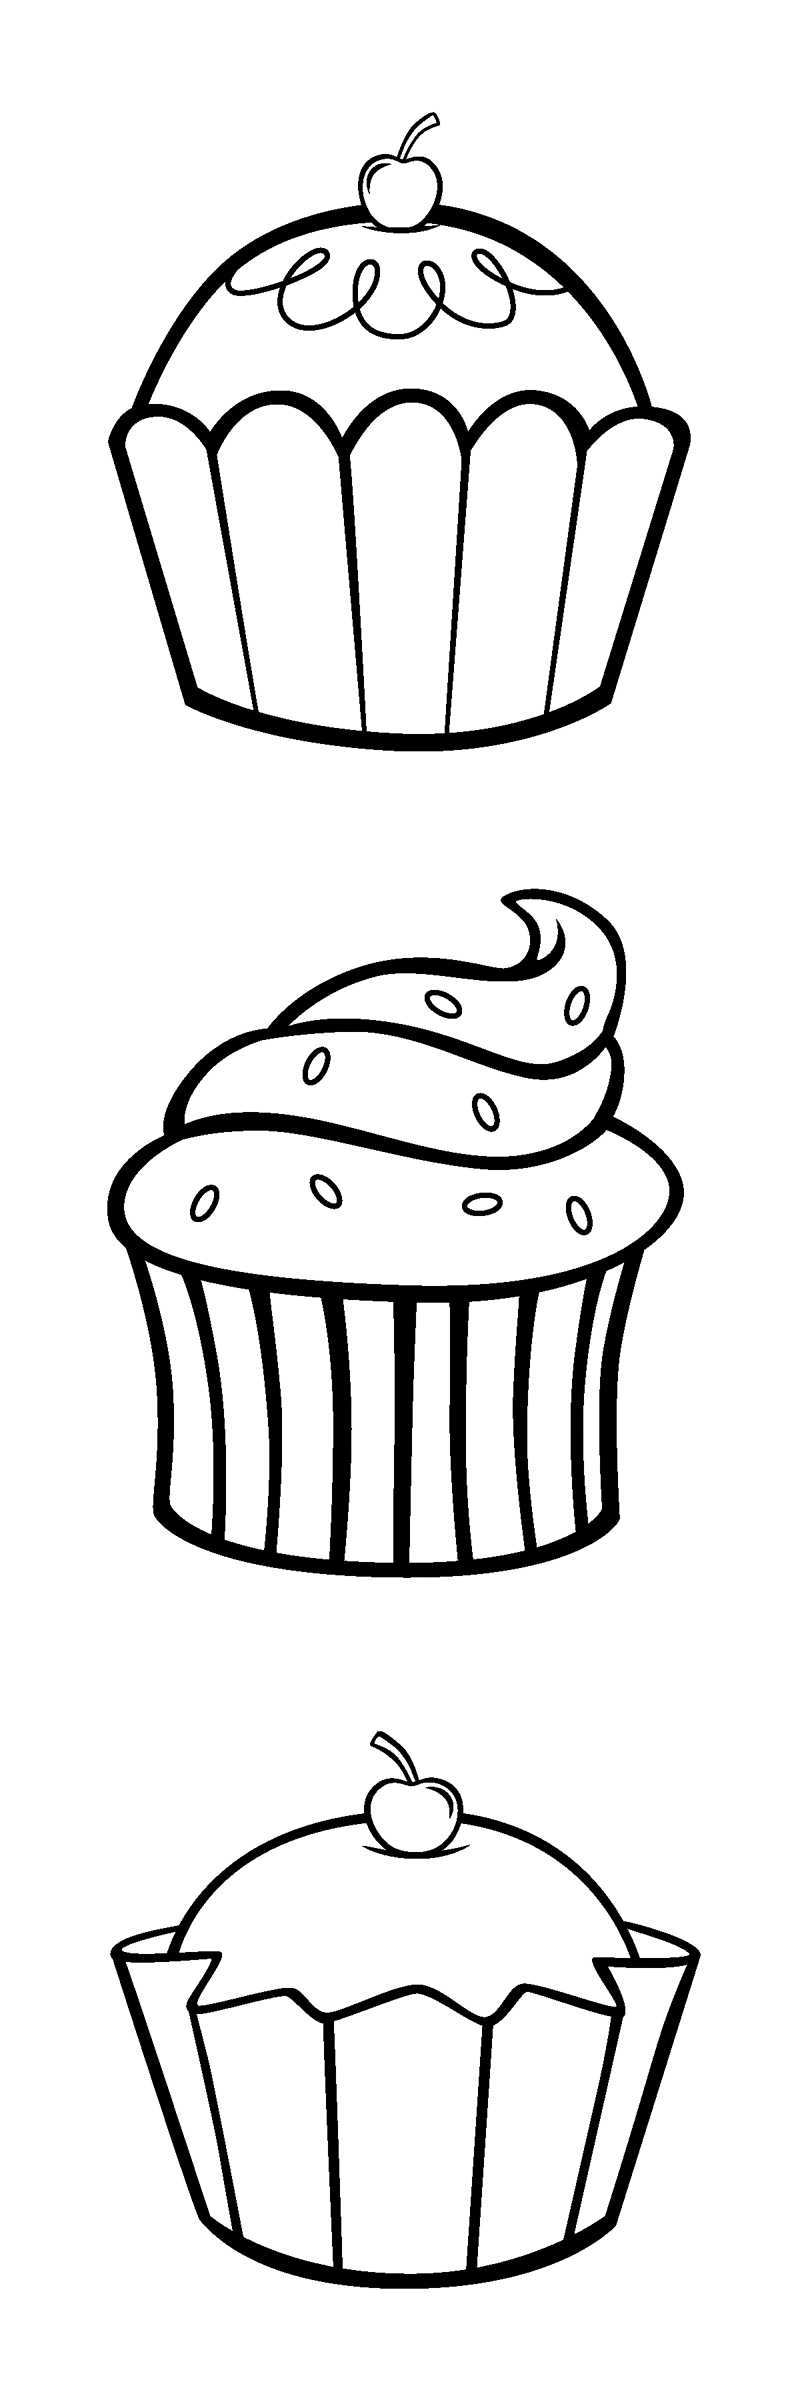 If You Can Print This Pic Of Cupcakes Cuz Their Easy And Fun To Colour Or Draw At All